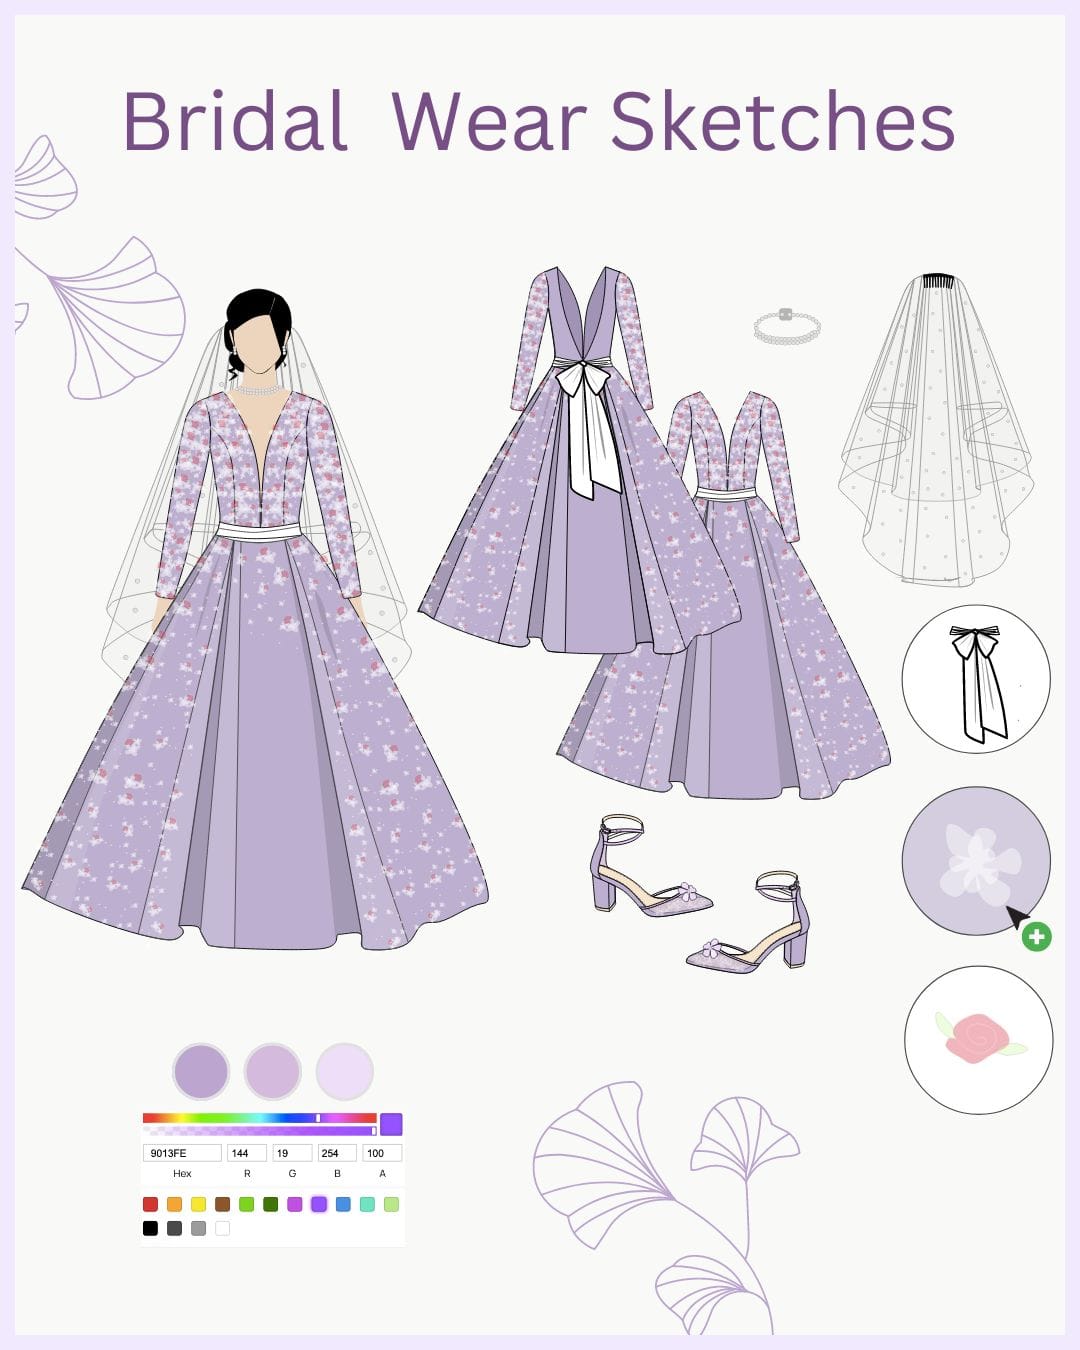 Bridal Wear Sketches and Templates Graphic